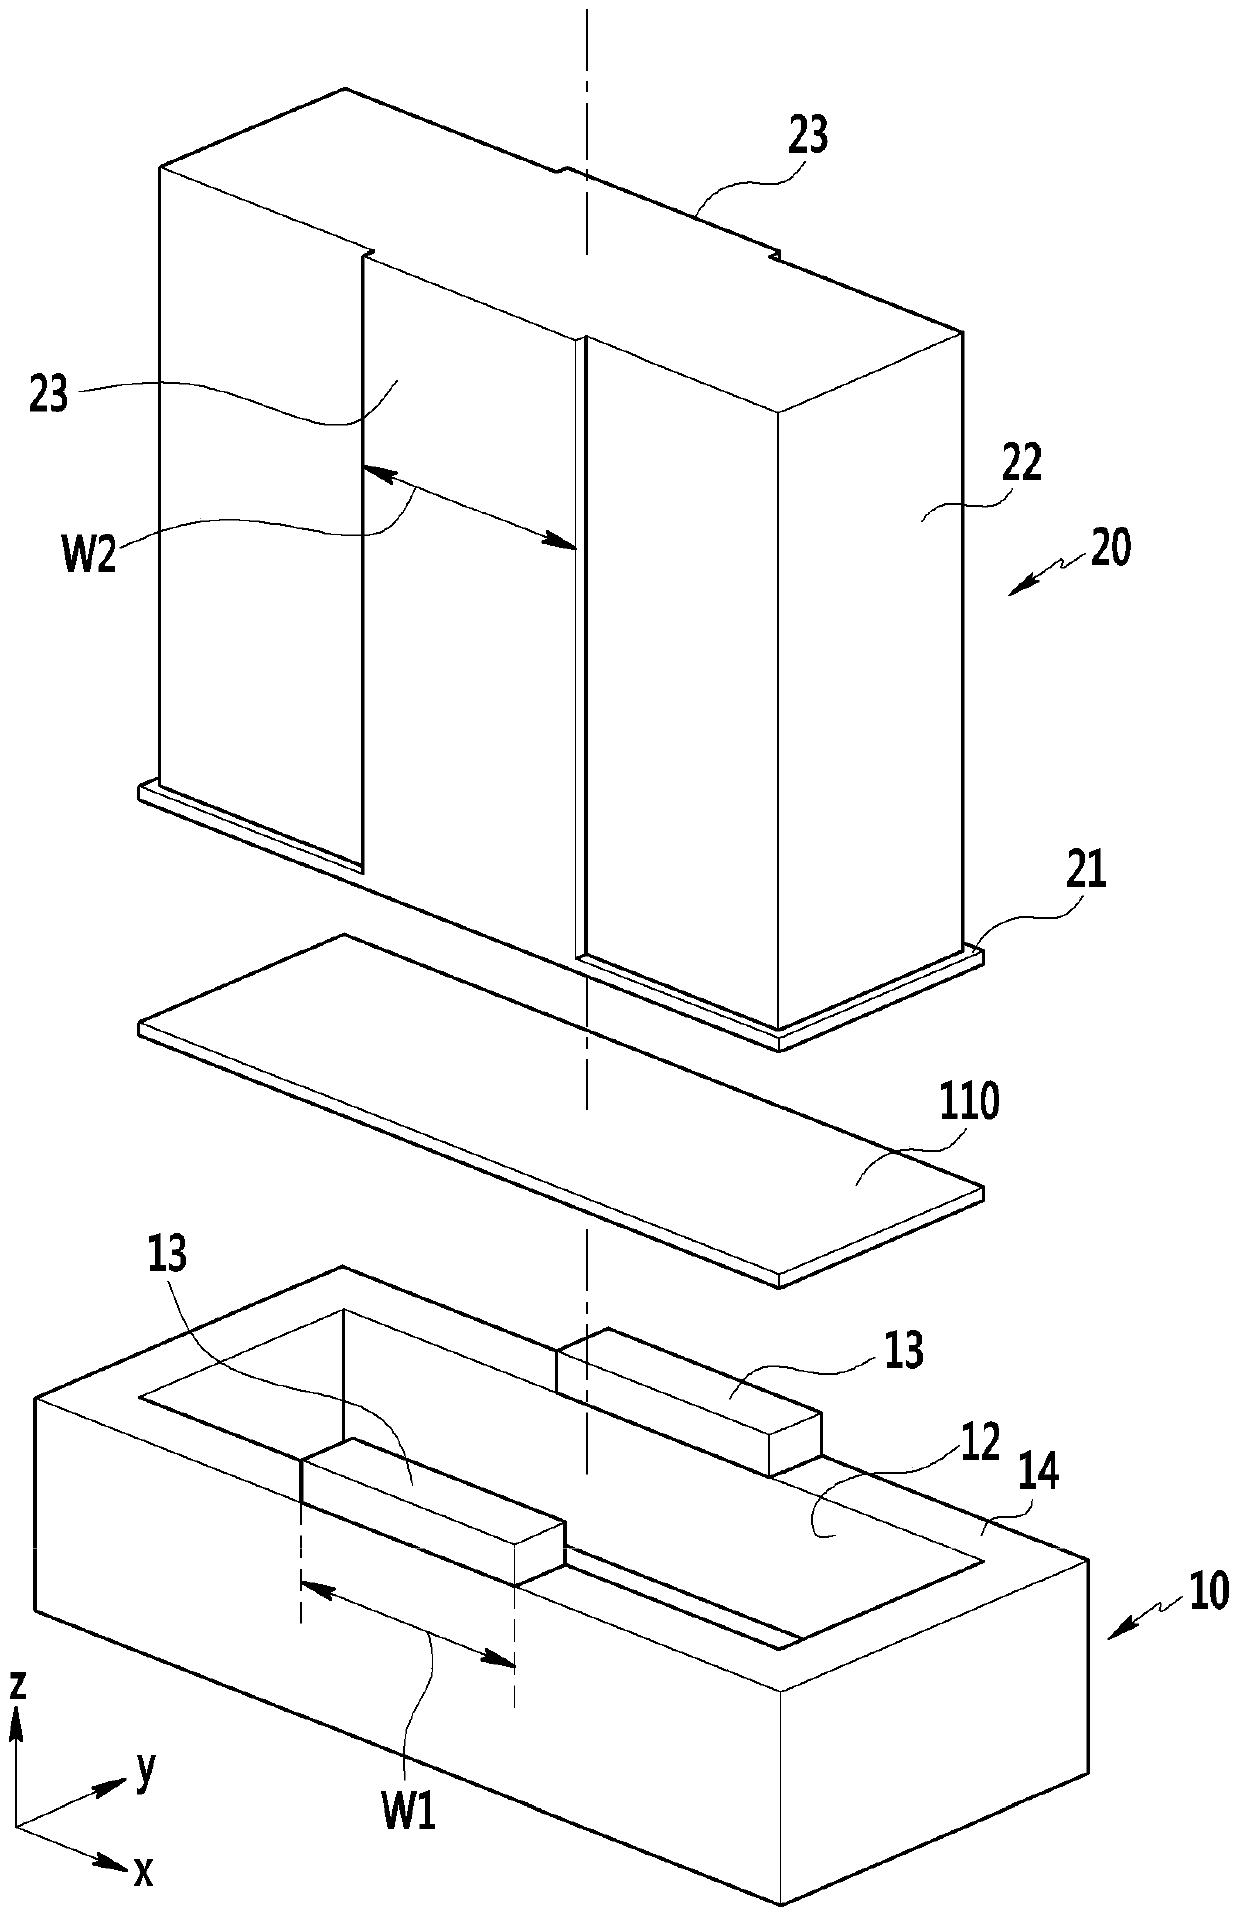 Reverse impact extrusion apparatus and method for manufacturing rechargeable battery casings